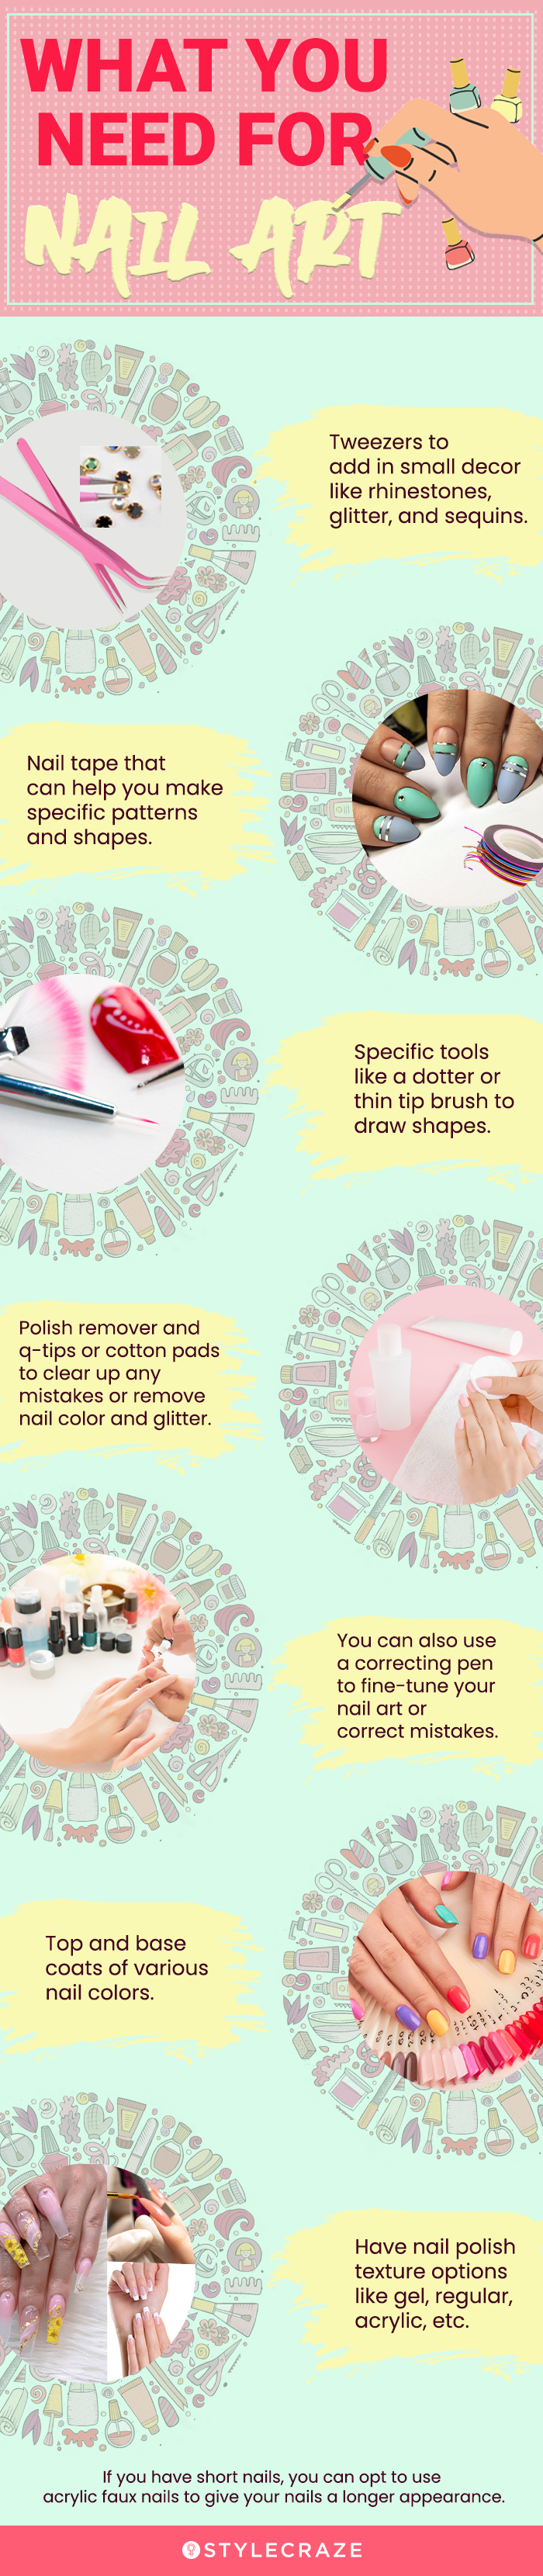 what you need for nail art [infographic]